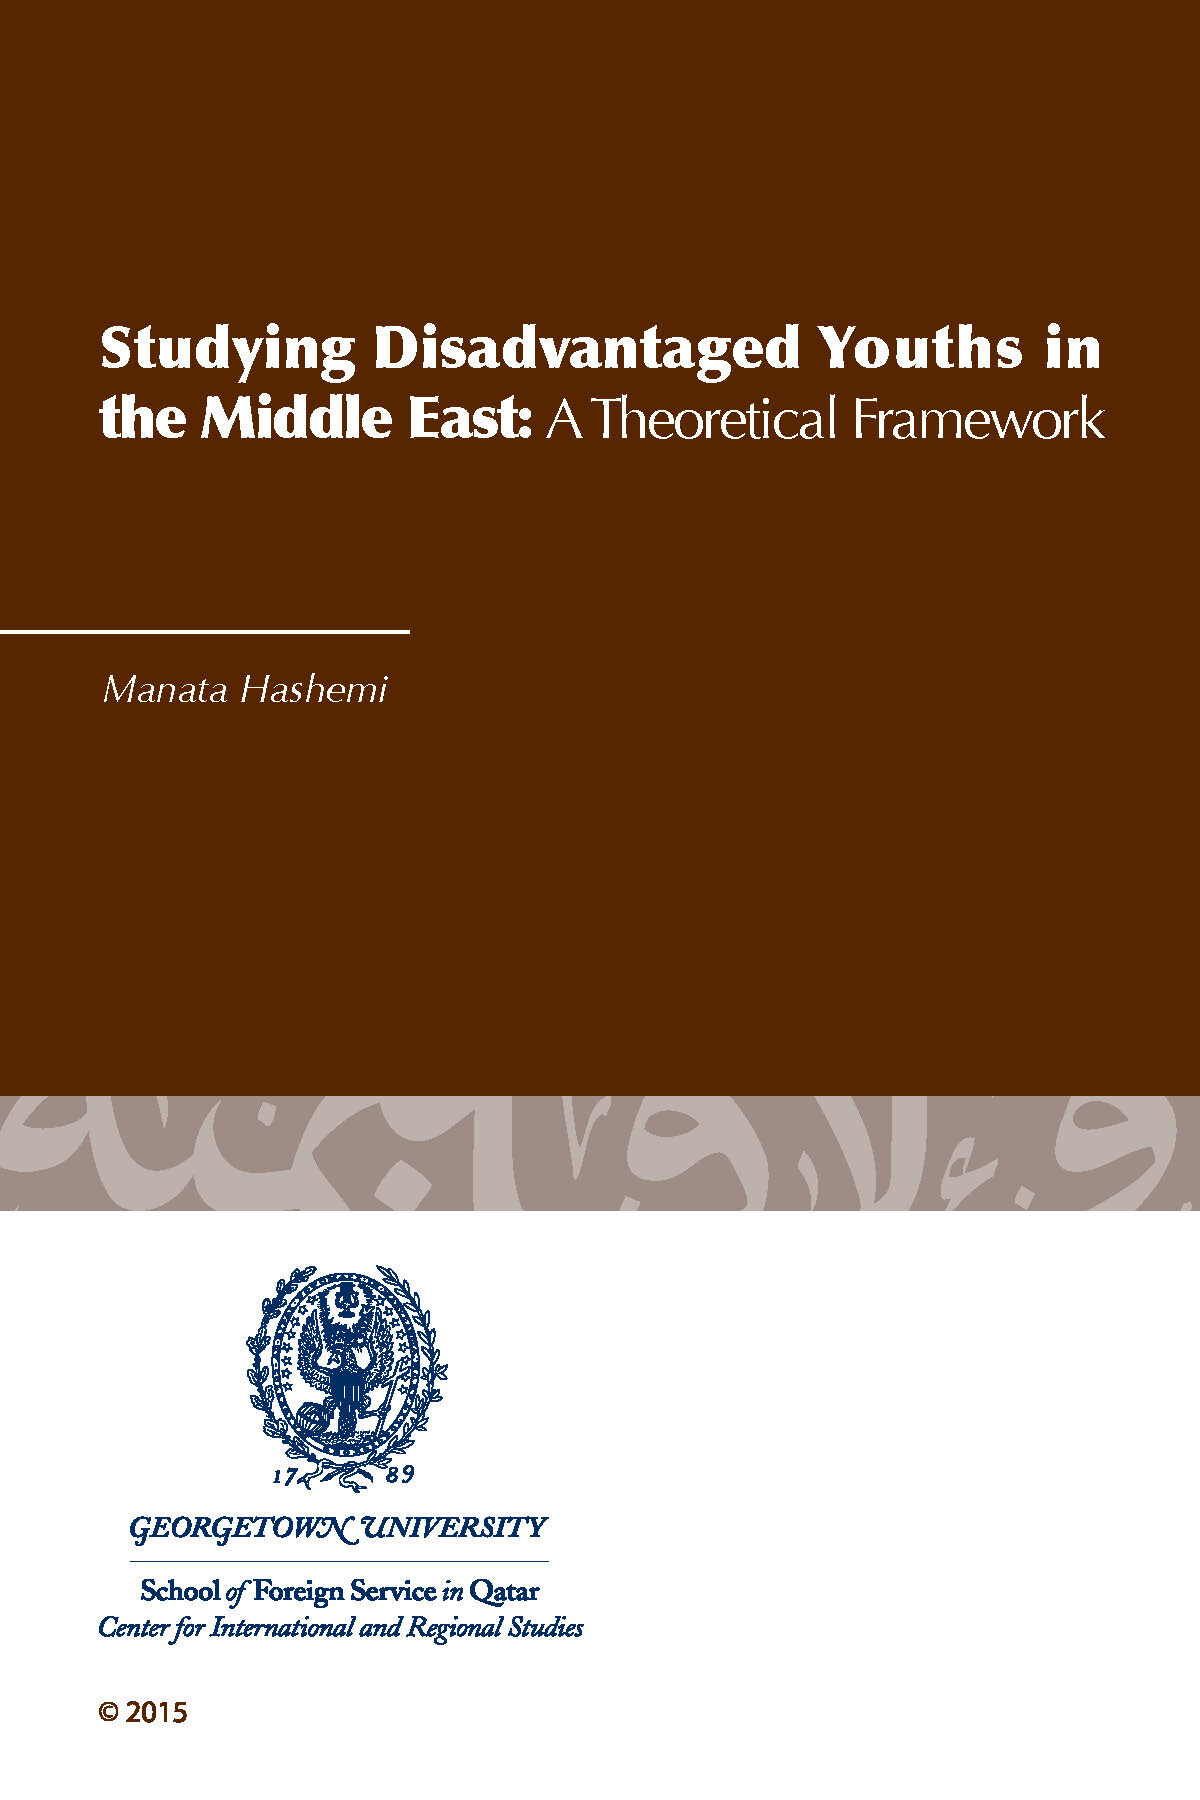 Studying Disadvantaged Youths in the Middle East: A Theoretical Framework